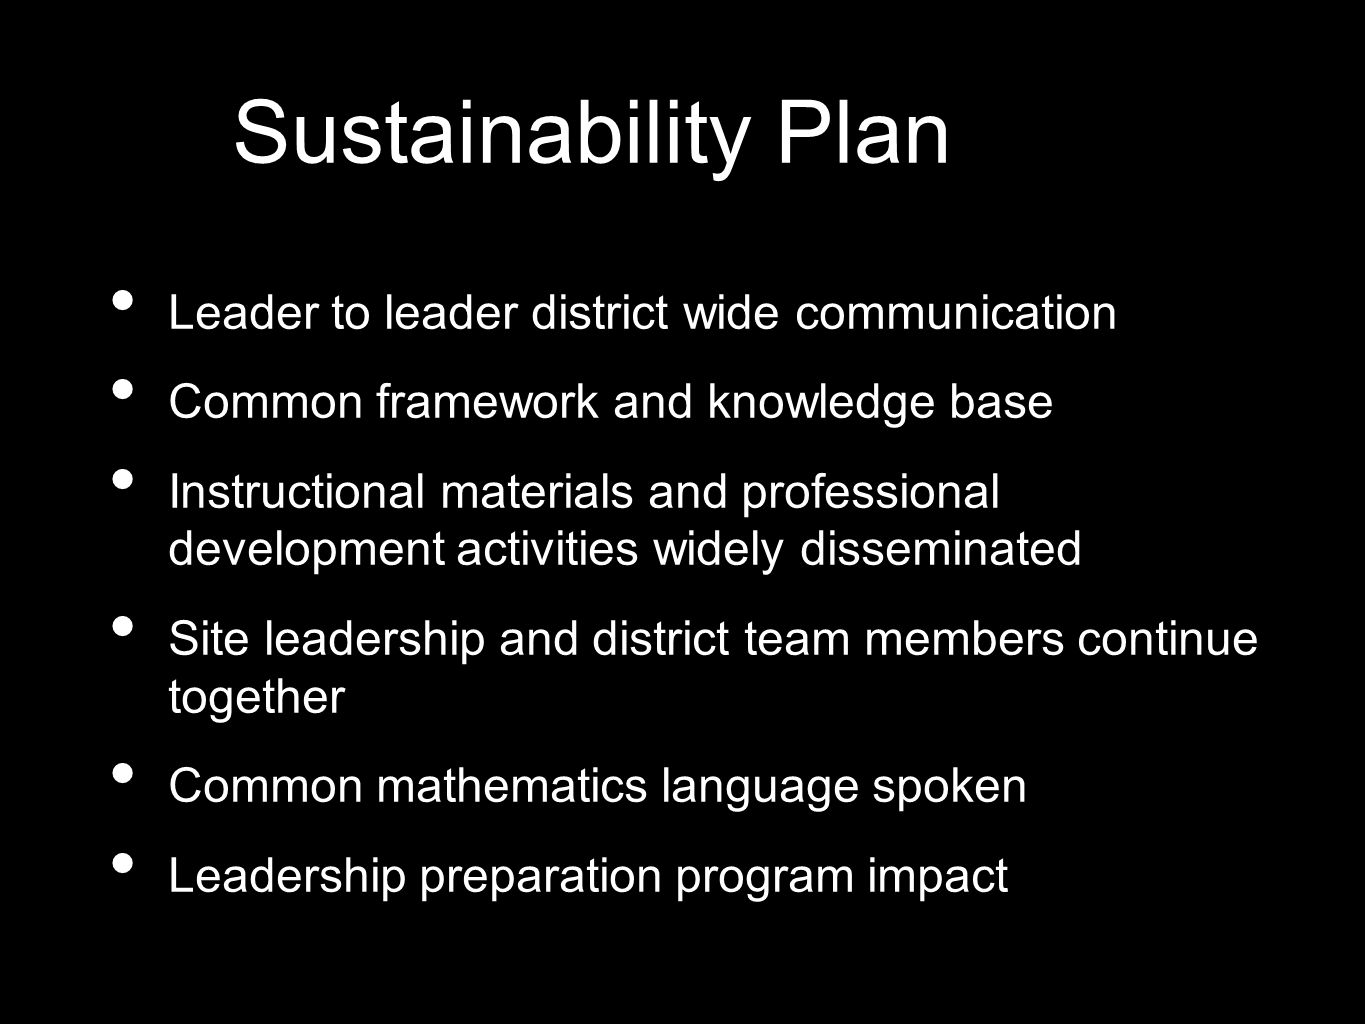 Sustainability Plan Leader to leader district wide communication Common framework and knowledge base Instructional materials and professional development activities widely disseminated Site leadership and district team members continue together Common mathematics language spoken Leadership preparation program impact